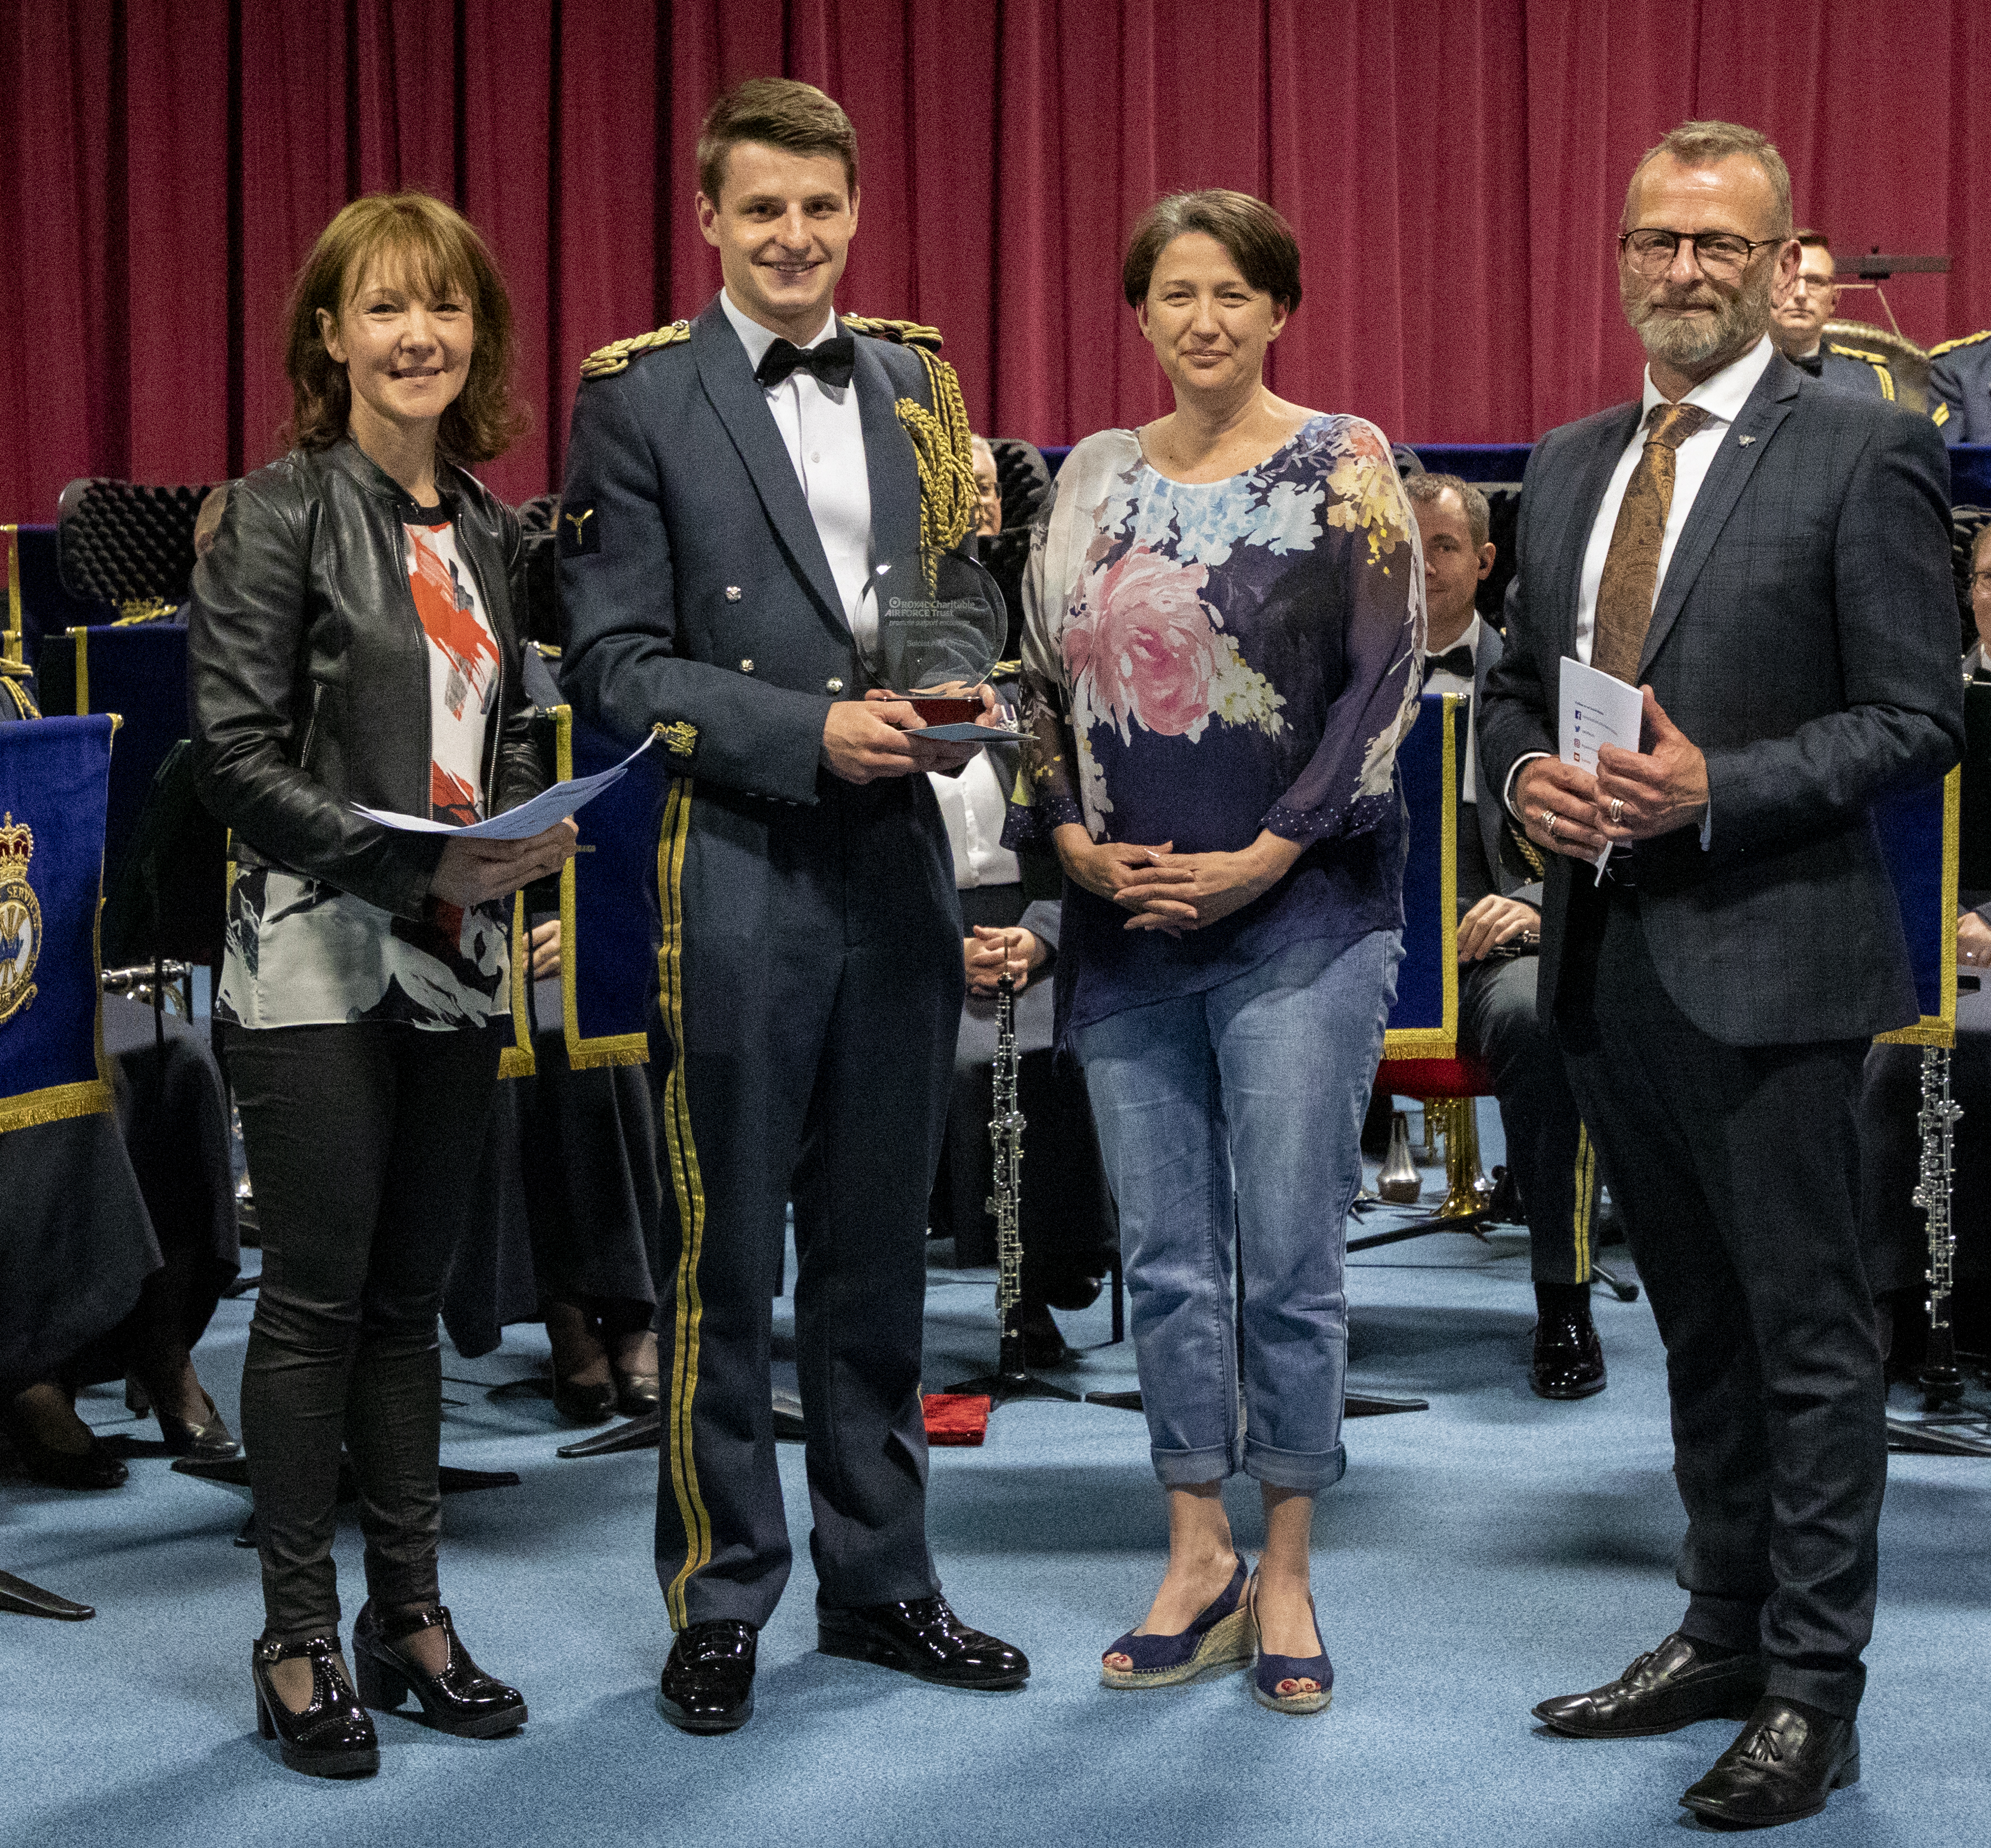 RAF Musician with Adjudicators, and Band in the background.